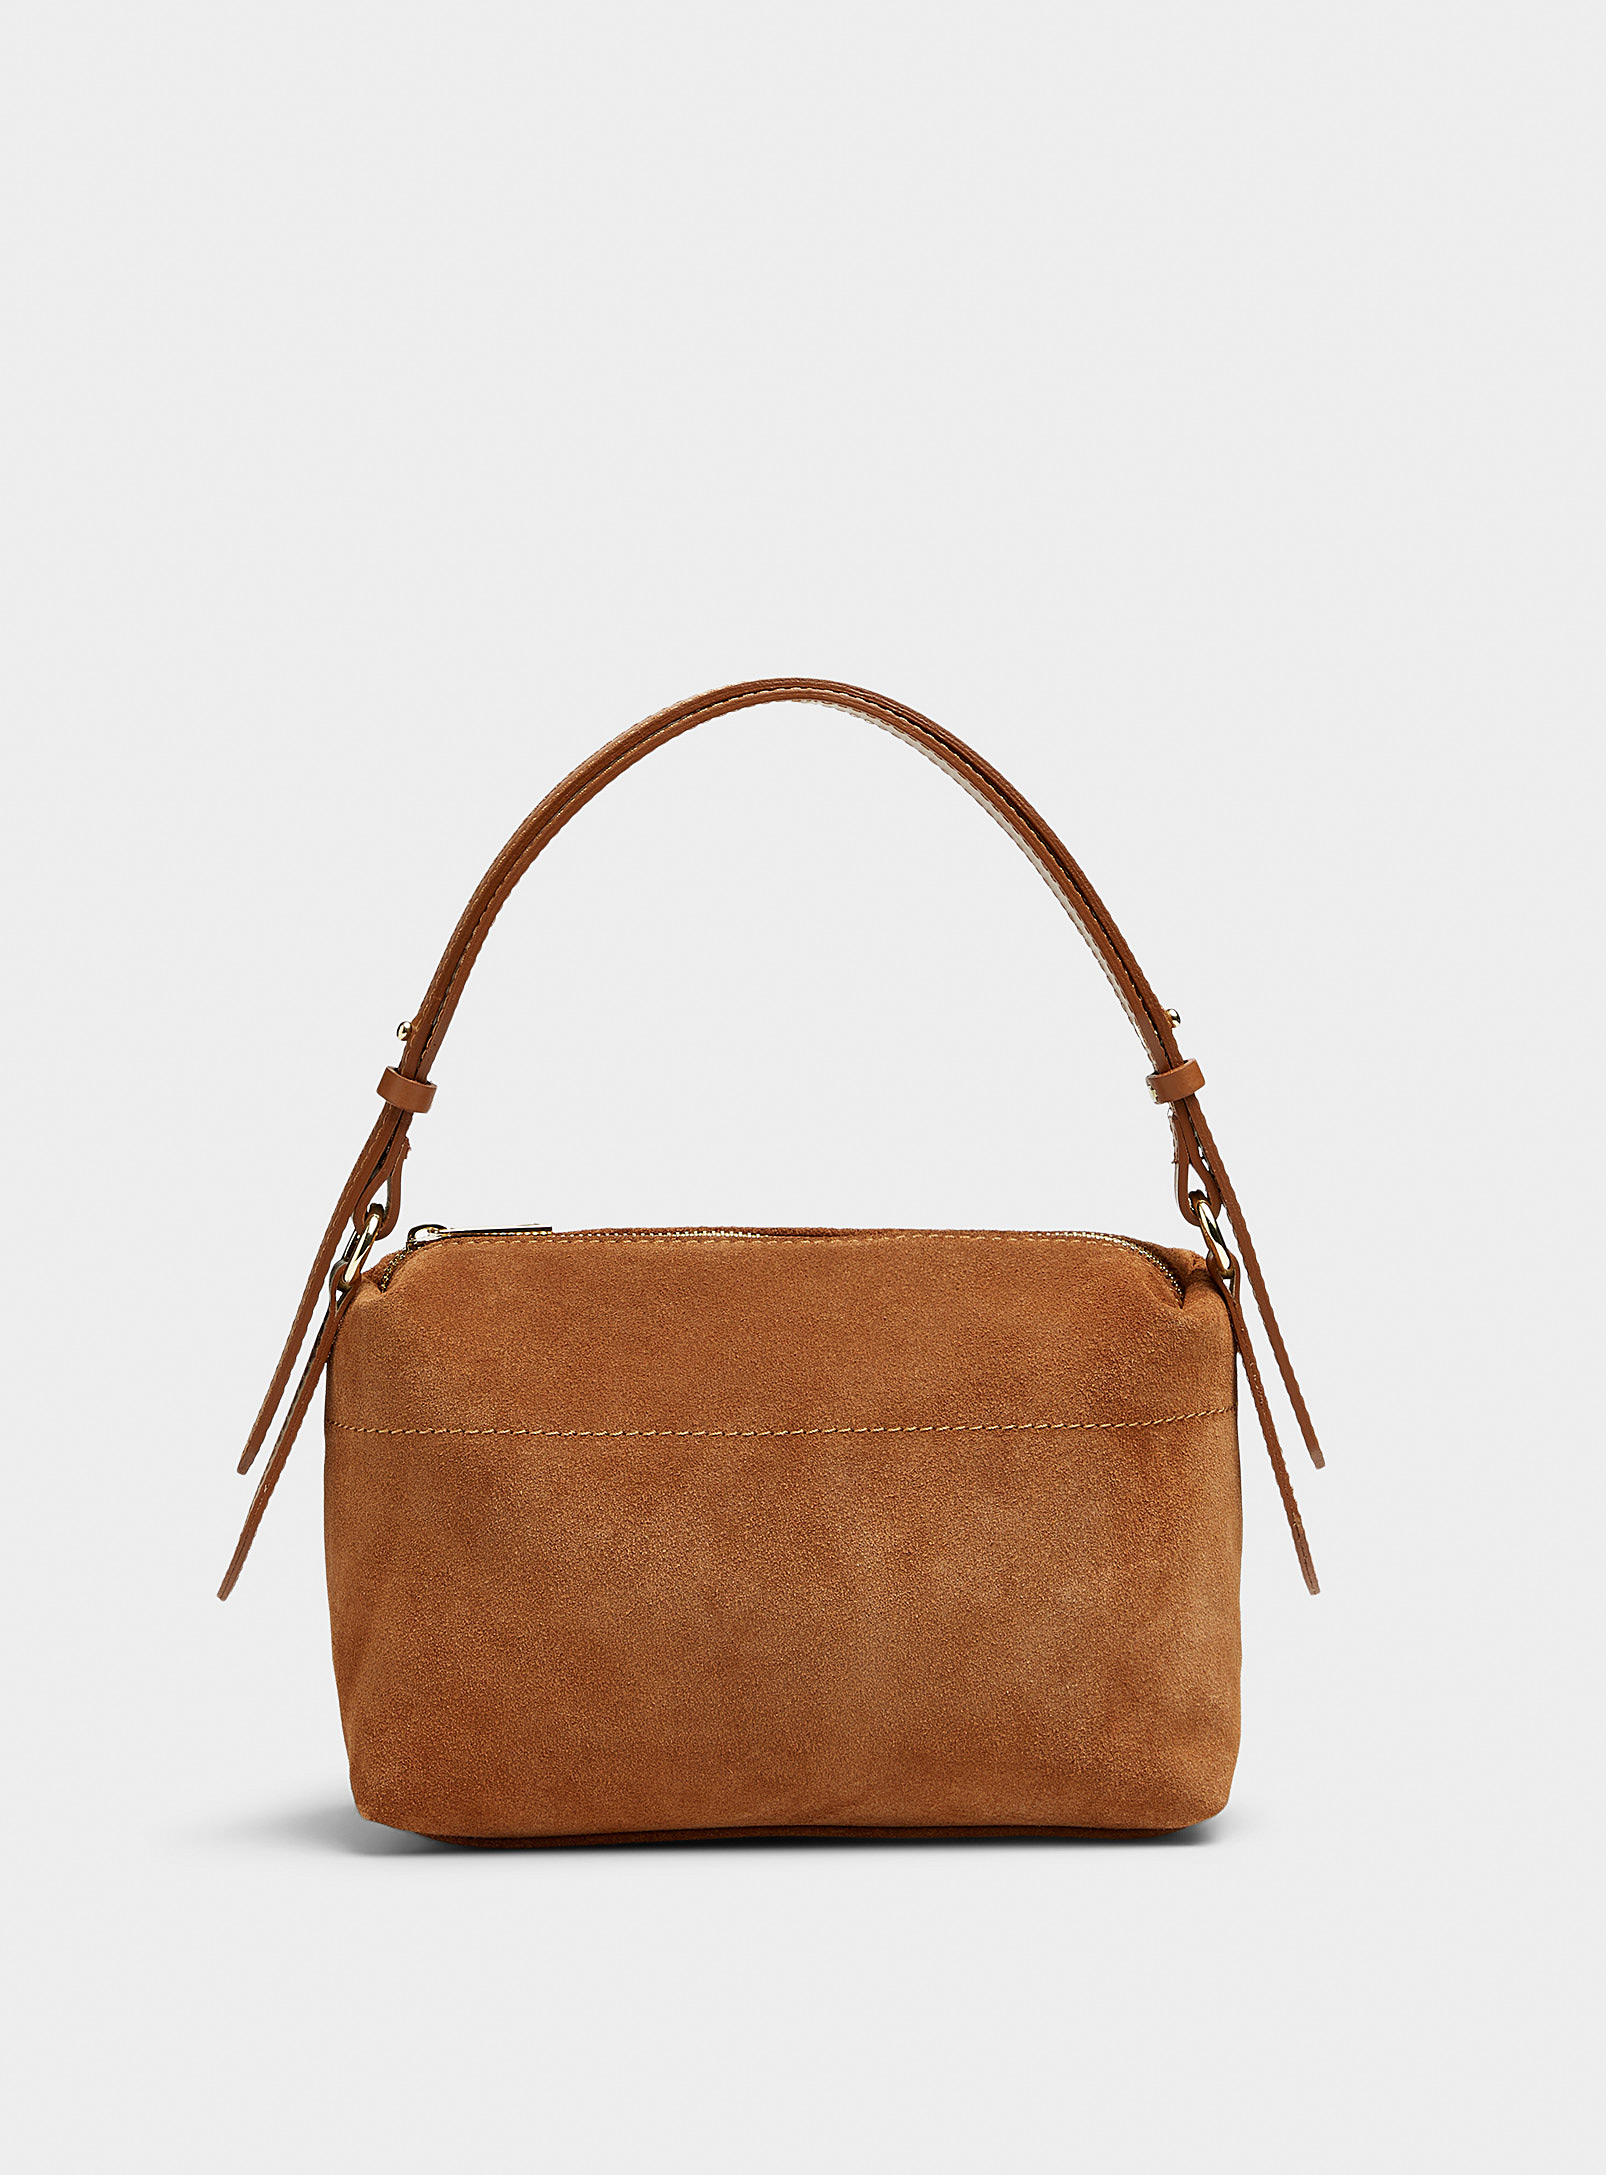 Simons - Women's Small rectangular suede& leather bag Exclusive collection from Italy